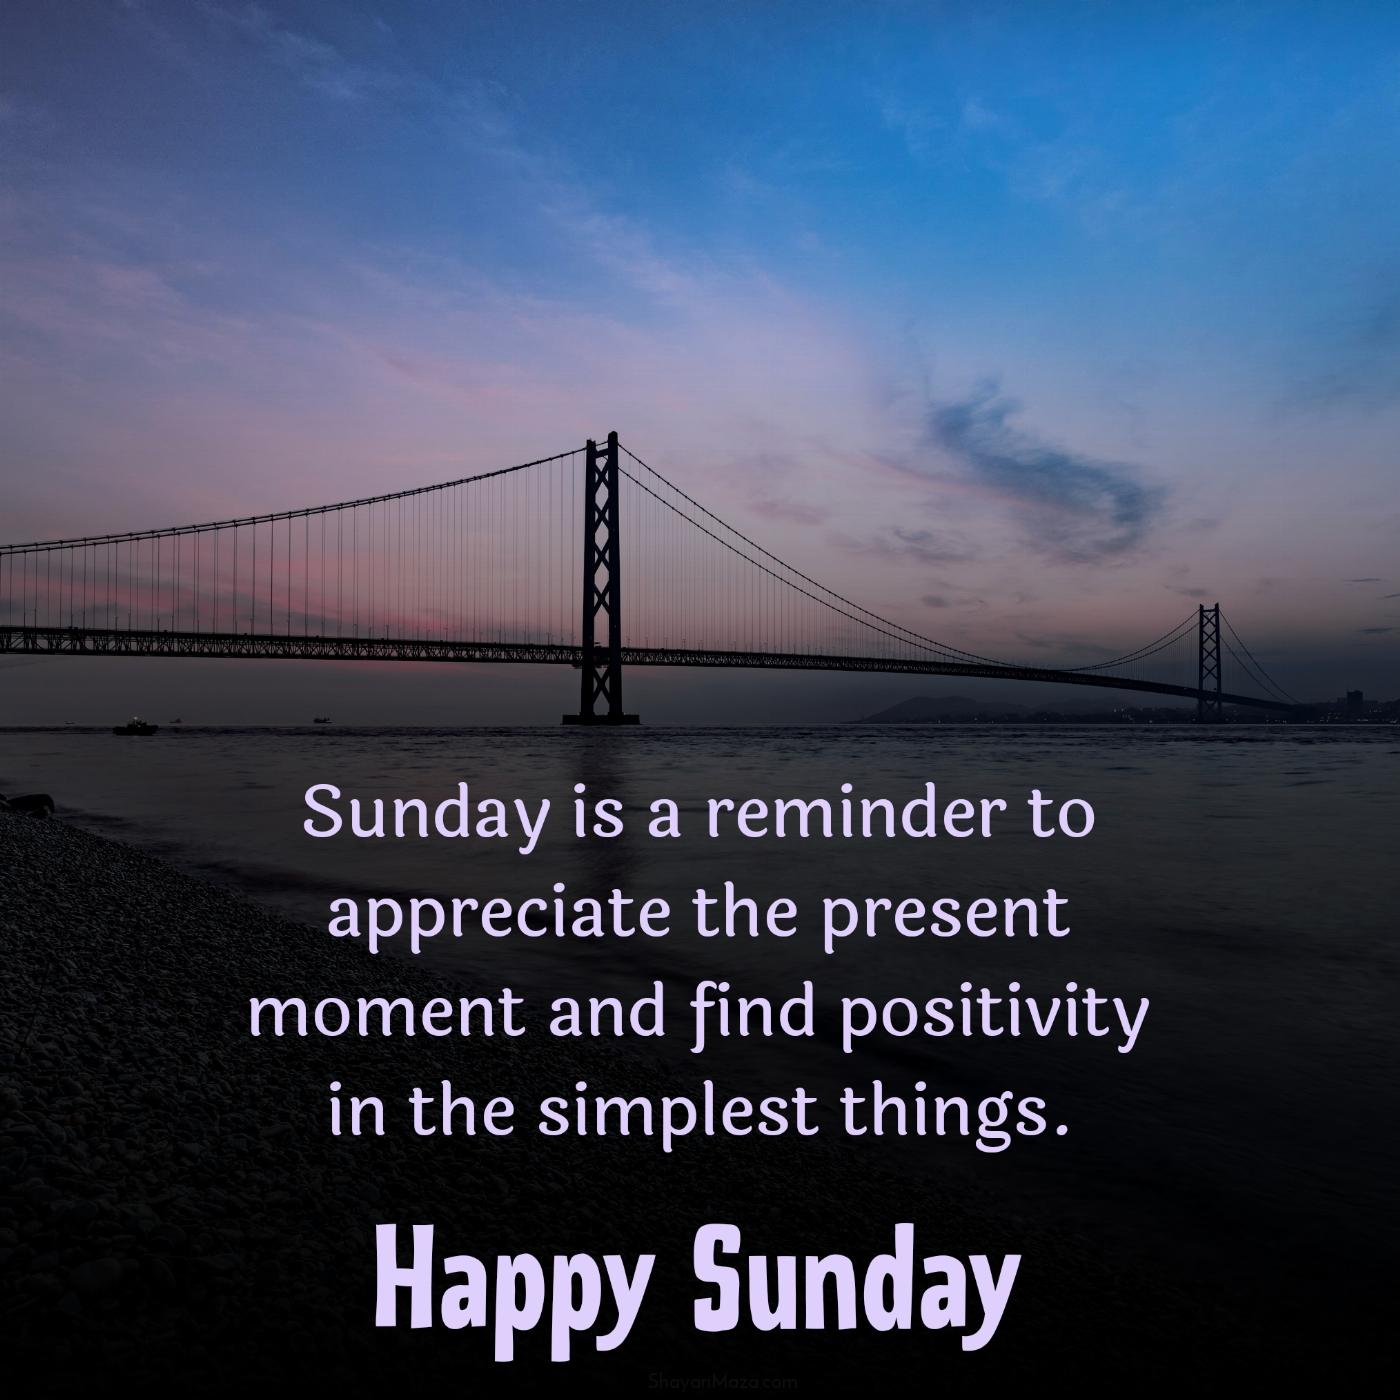 Sunday is a reminder to appreciate the present moment